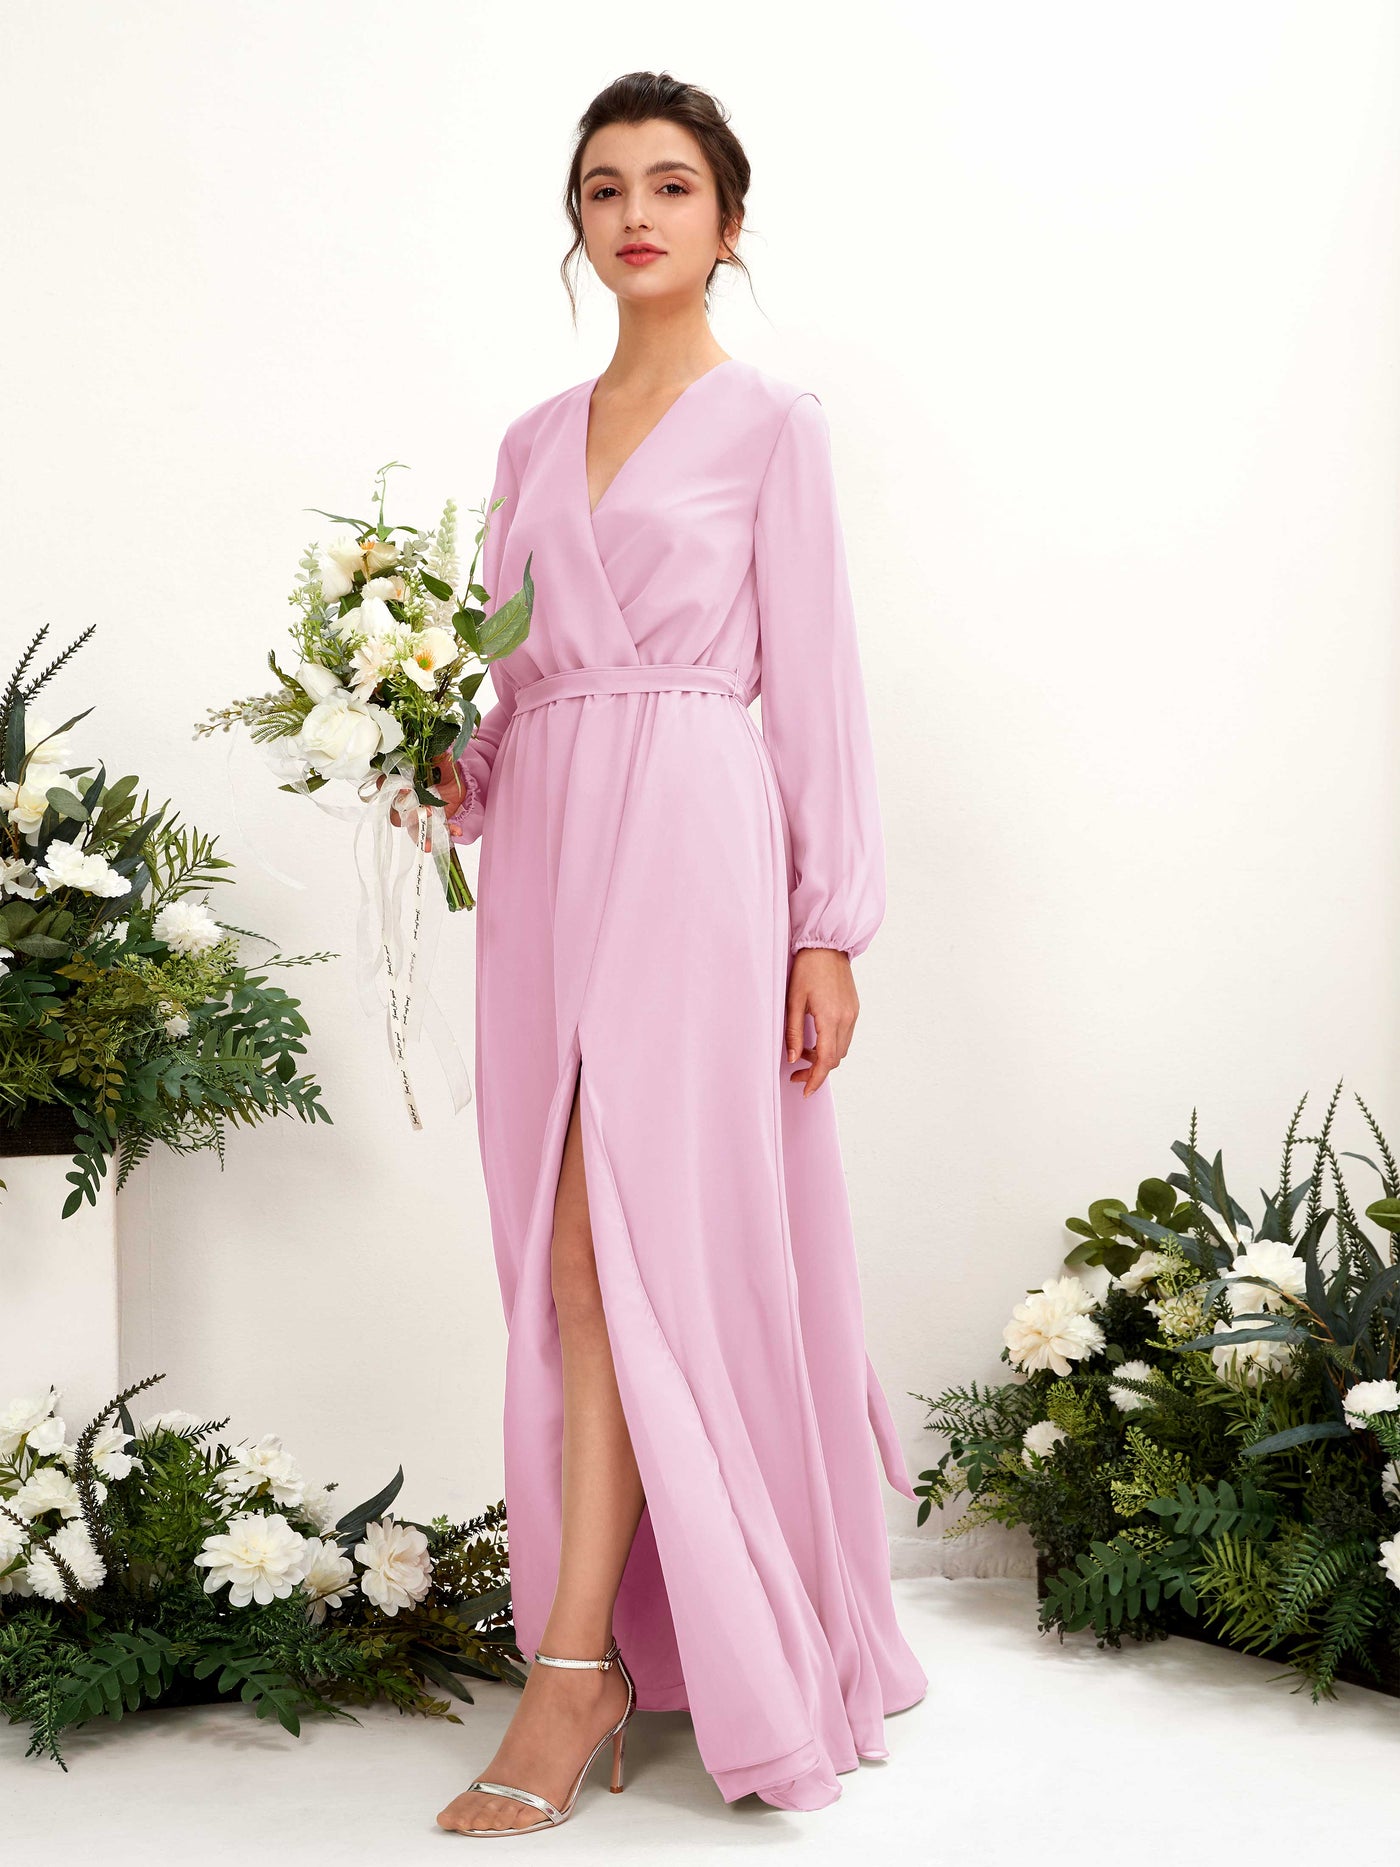 Candy Pink Bridesmaid Dresses Bridesmaid Dress A-line Chiffon V-neck Full Length Long Sleeves Wedding Party Dress (81223239)#color_candy-pink